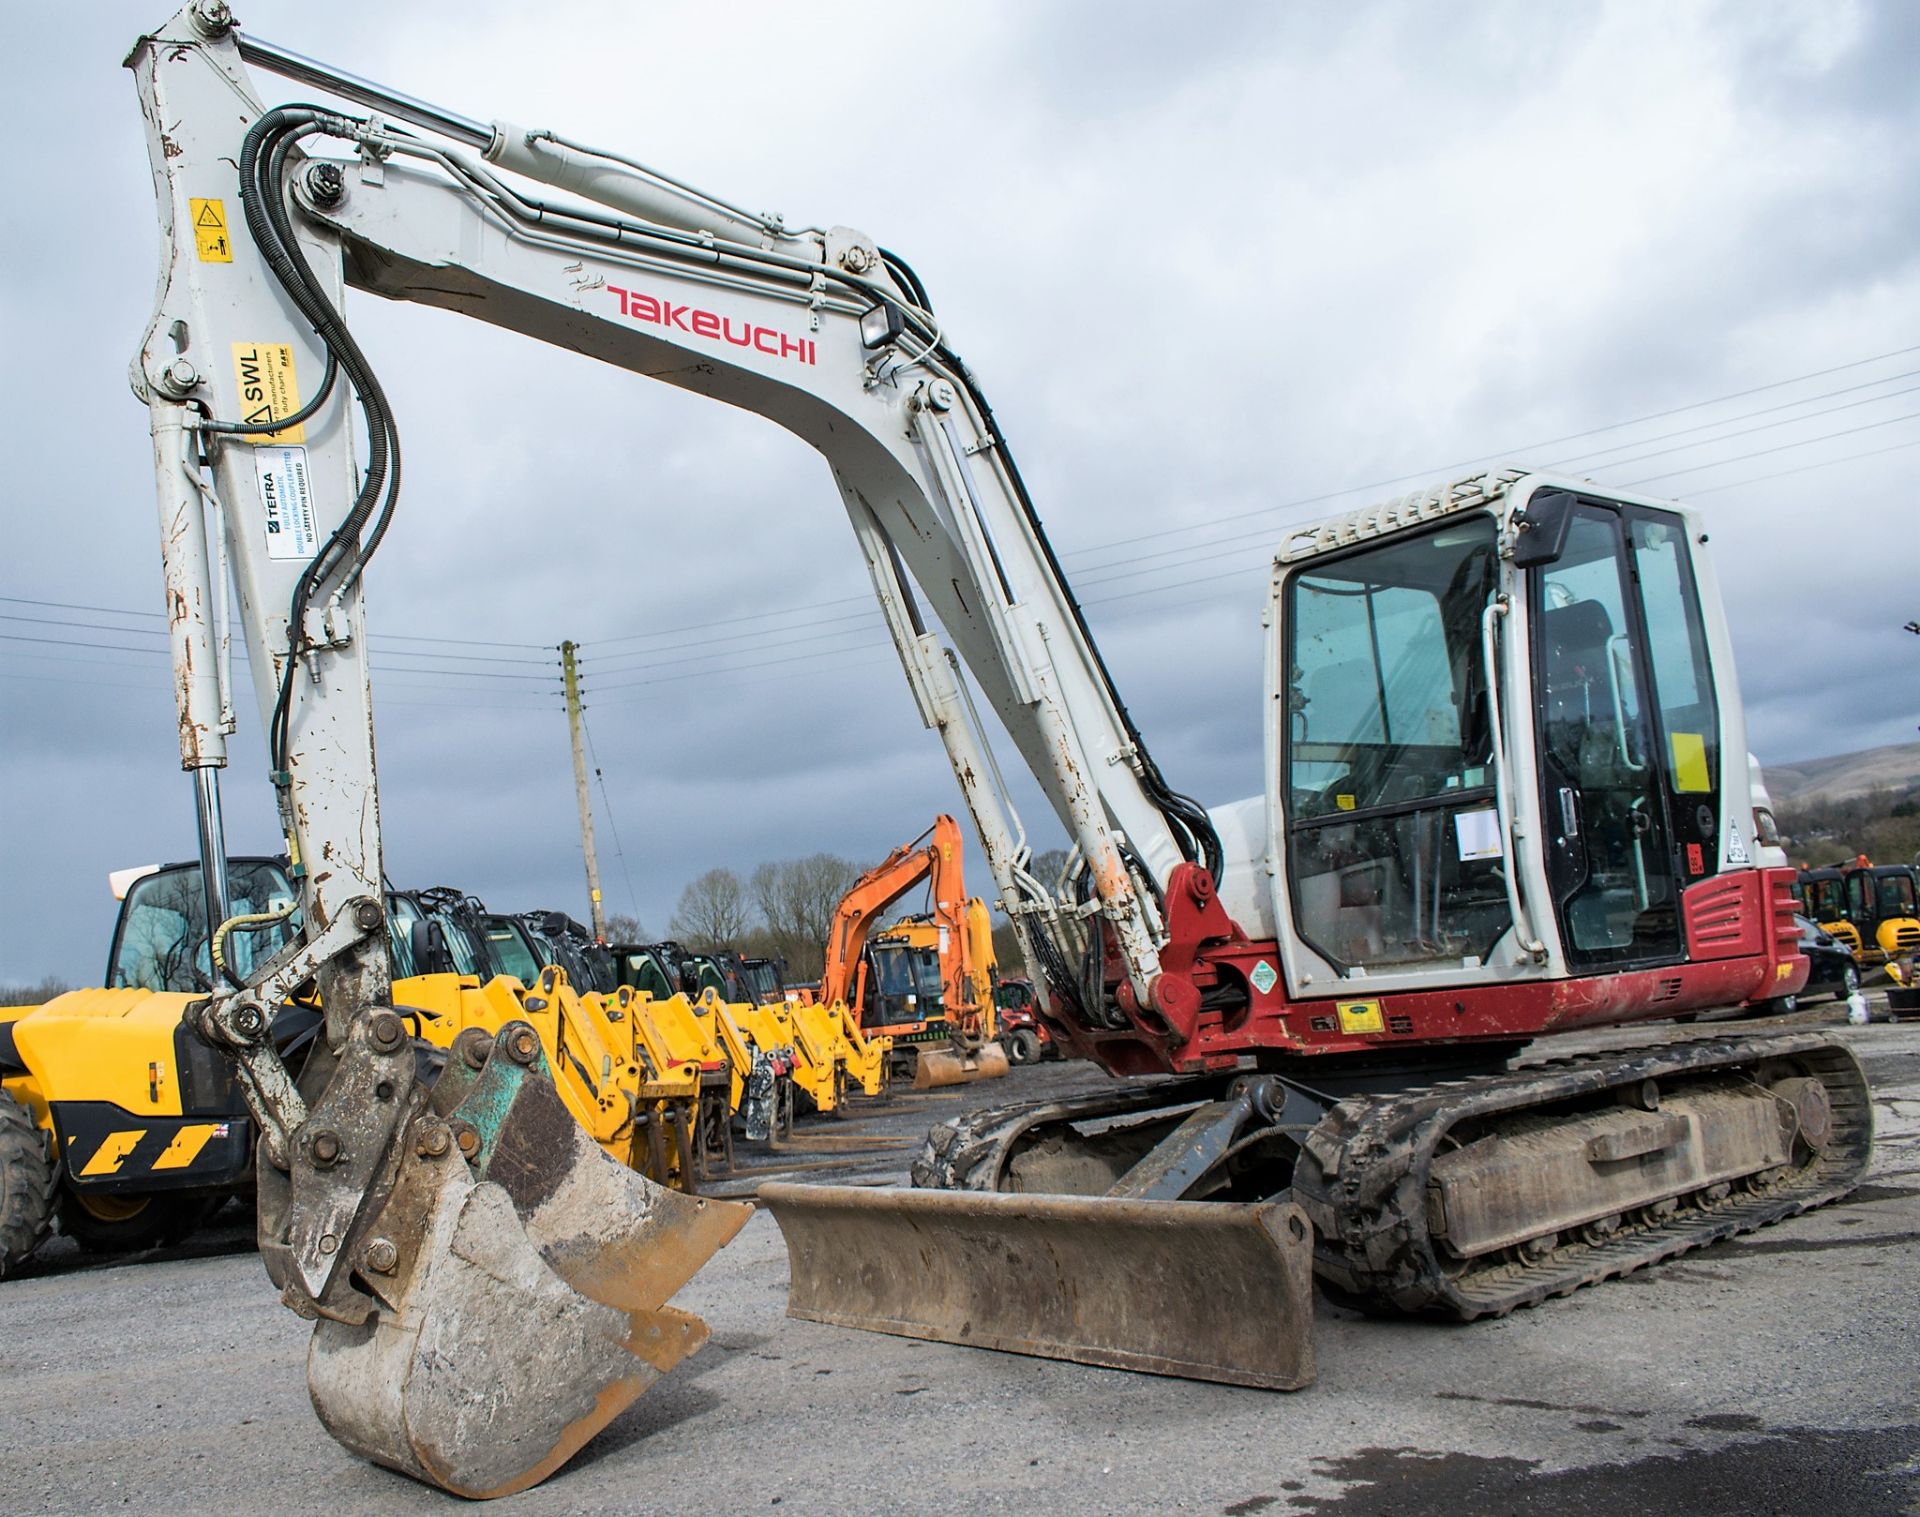 Takeuchi TB285 8.5 tonne rubber tracked excavator Year: 2012 S/N: 185000171 Recorded Hours: 6004